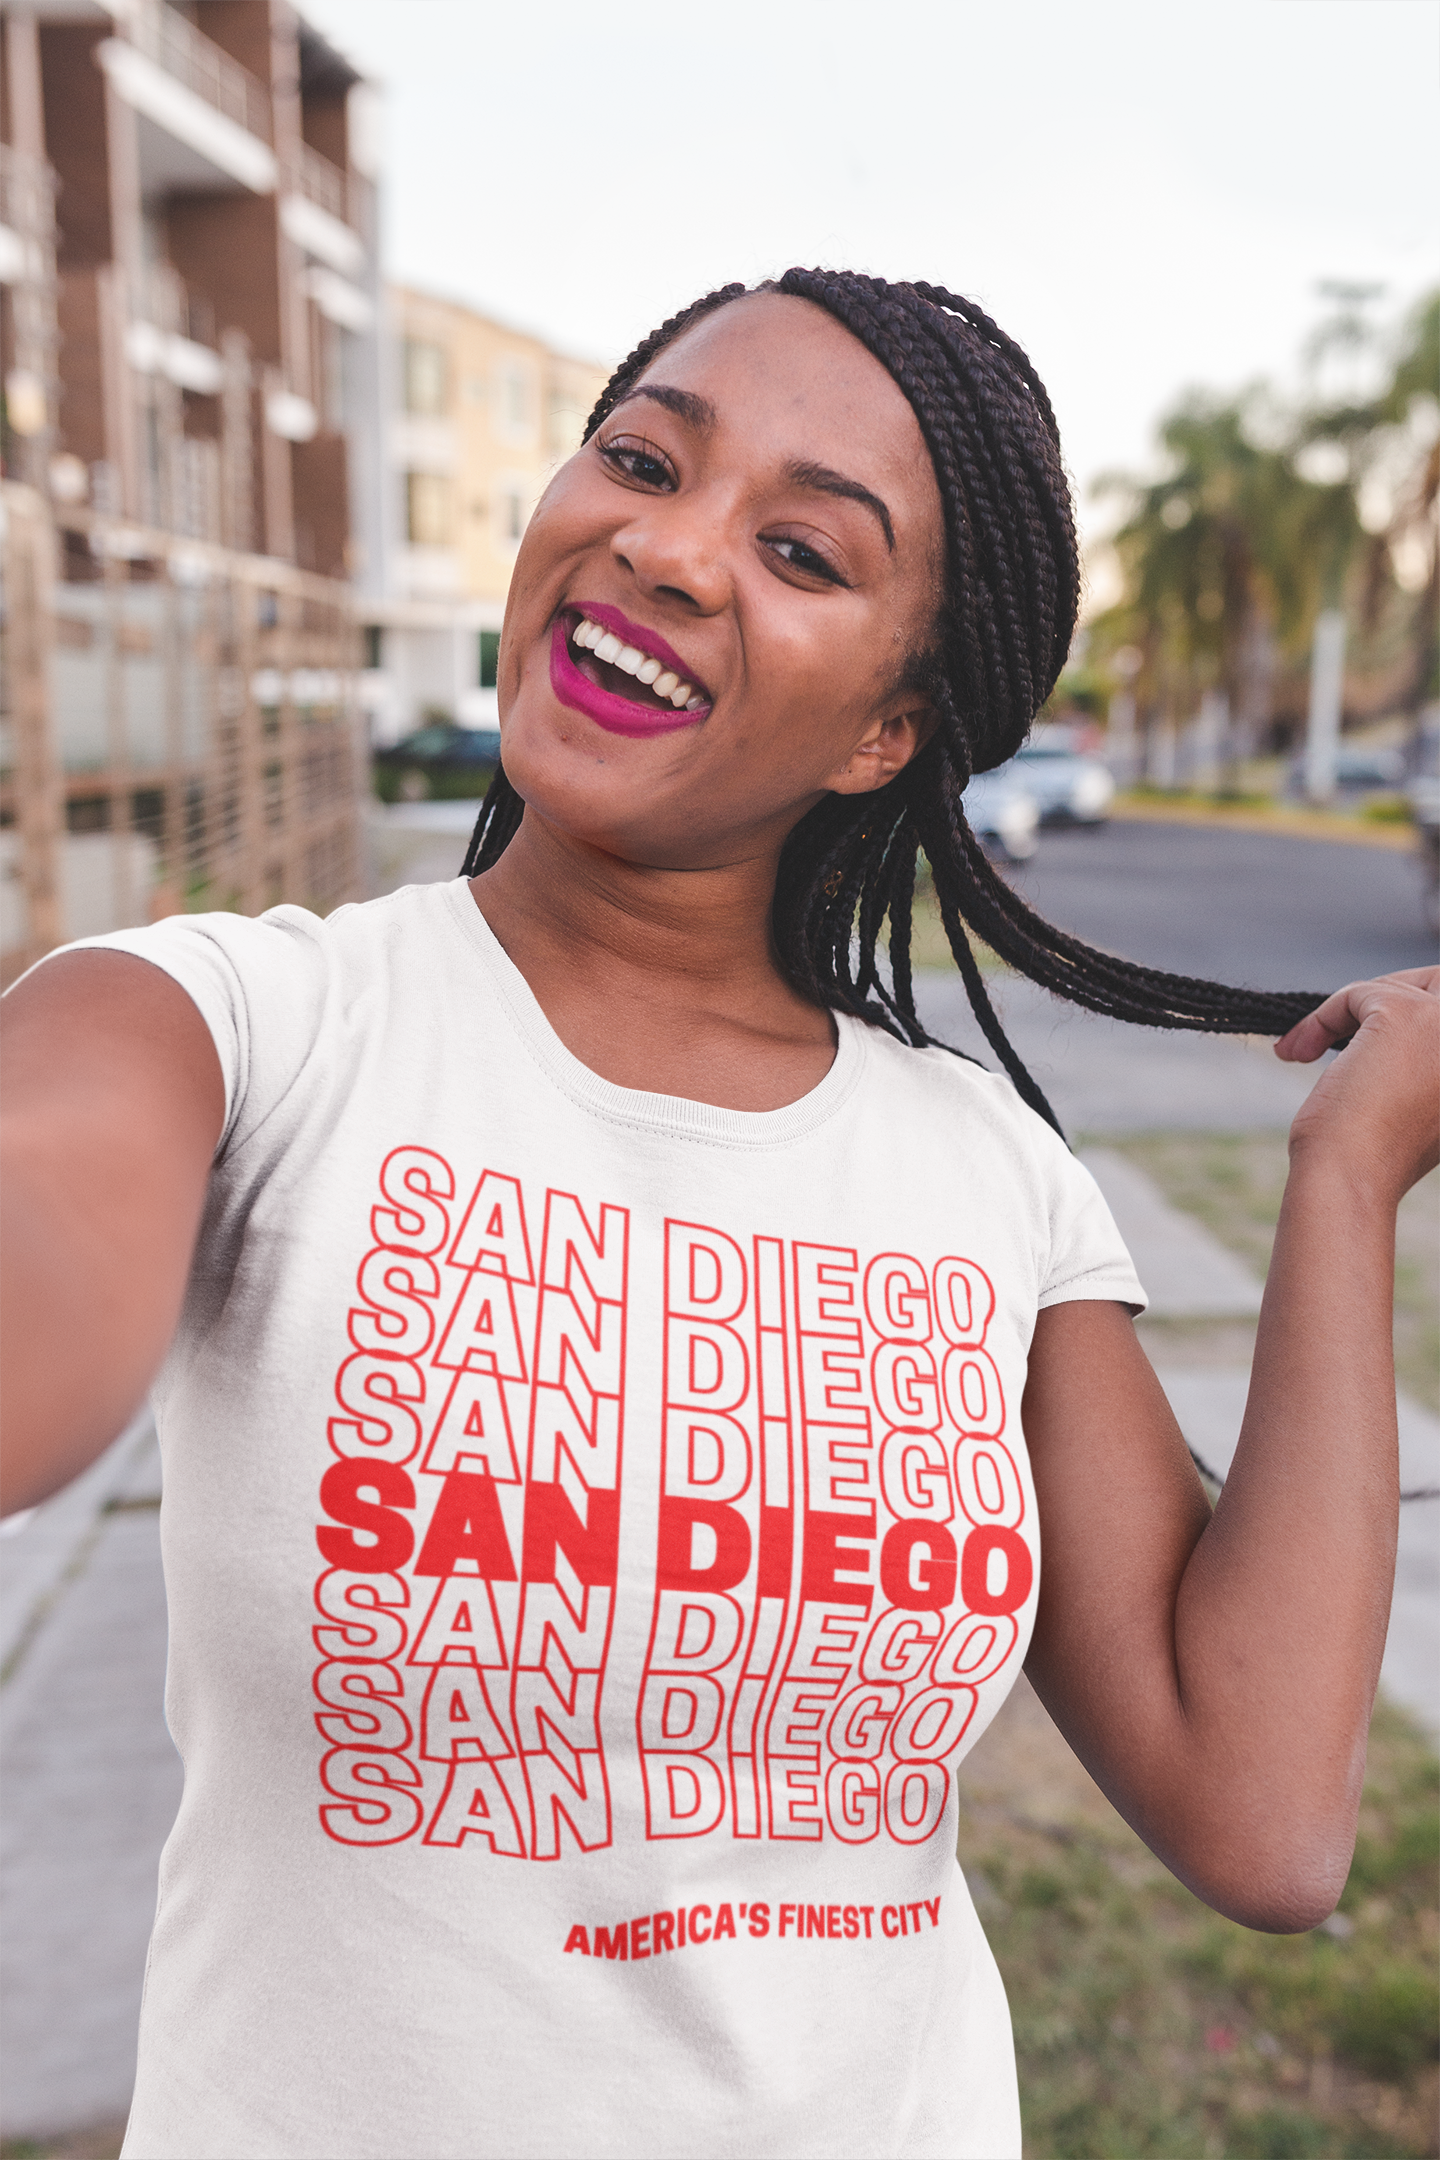 Smiling black woman taking a selfie outside wearing a red and white San Diego t-shirt.